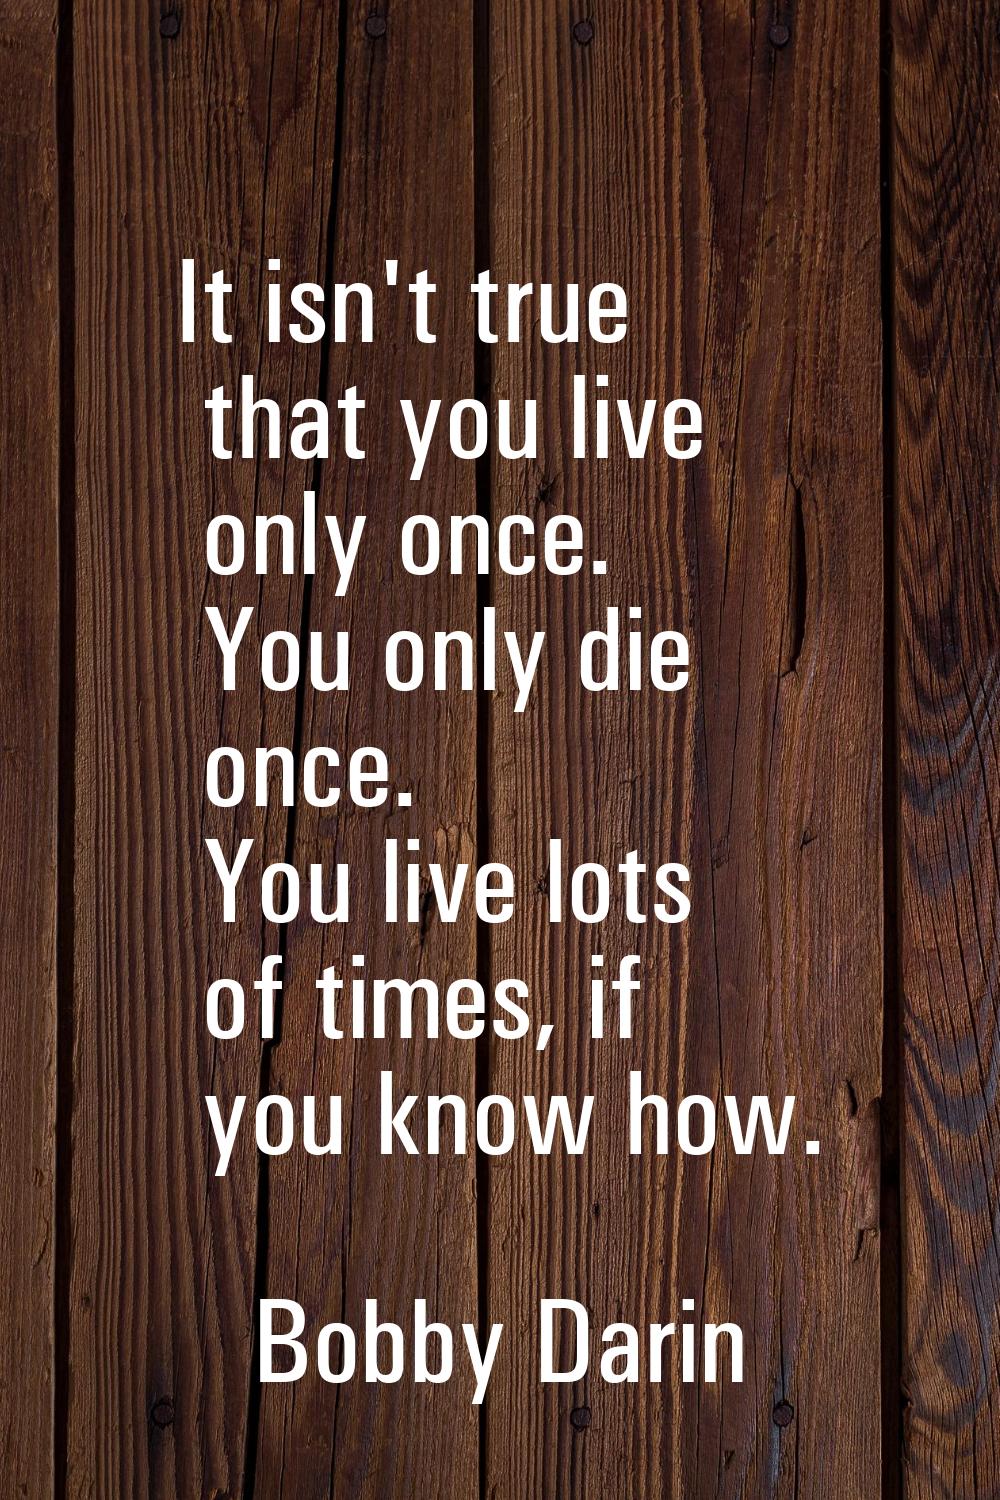 It isn't true that you live only once. You only die once. You live lots of times, if you know how.